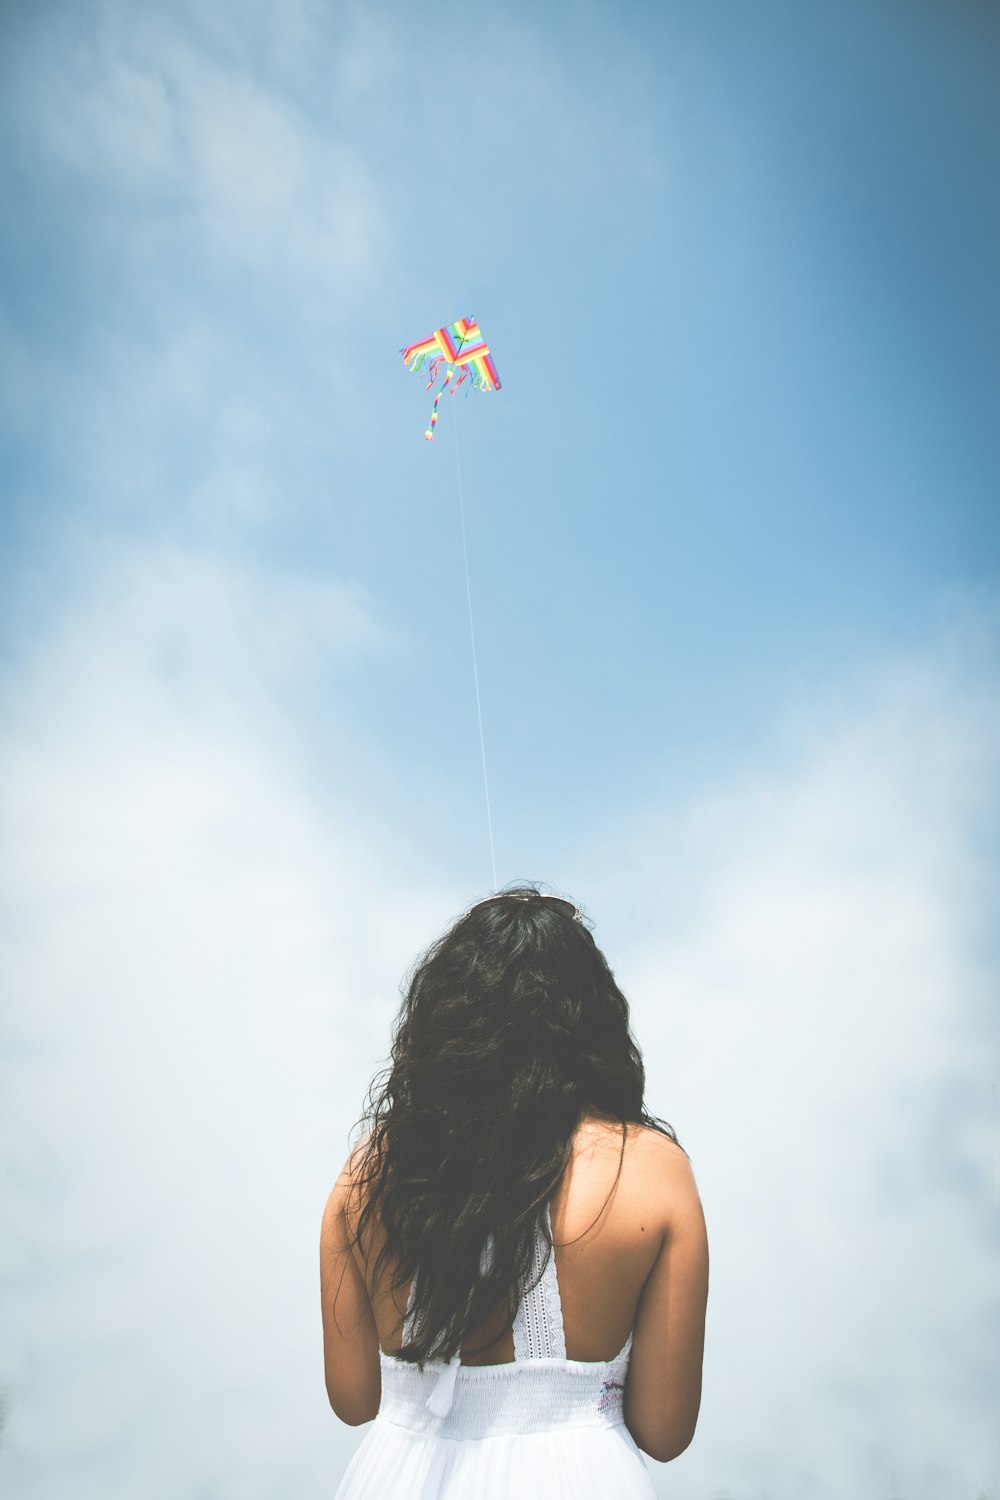 a woman in a white dress flying a kite